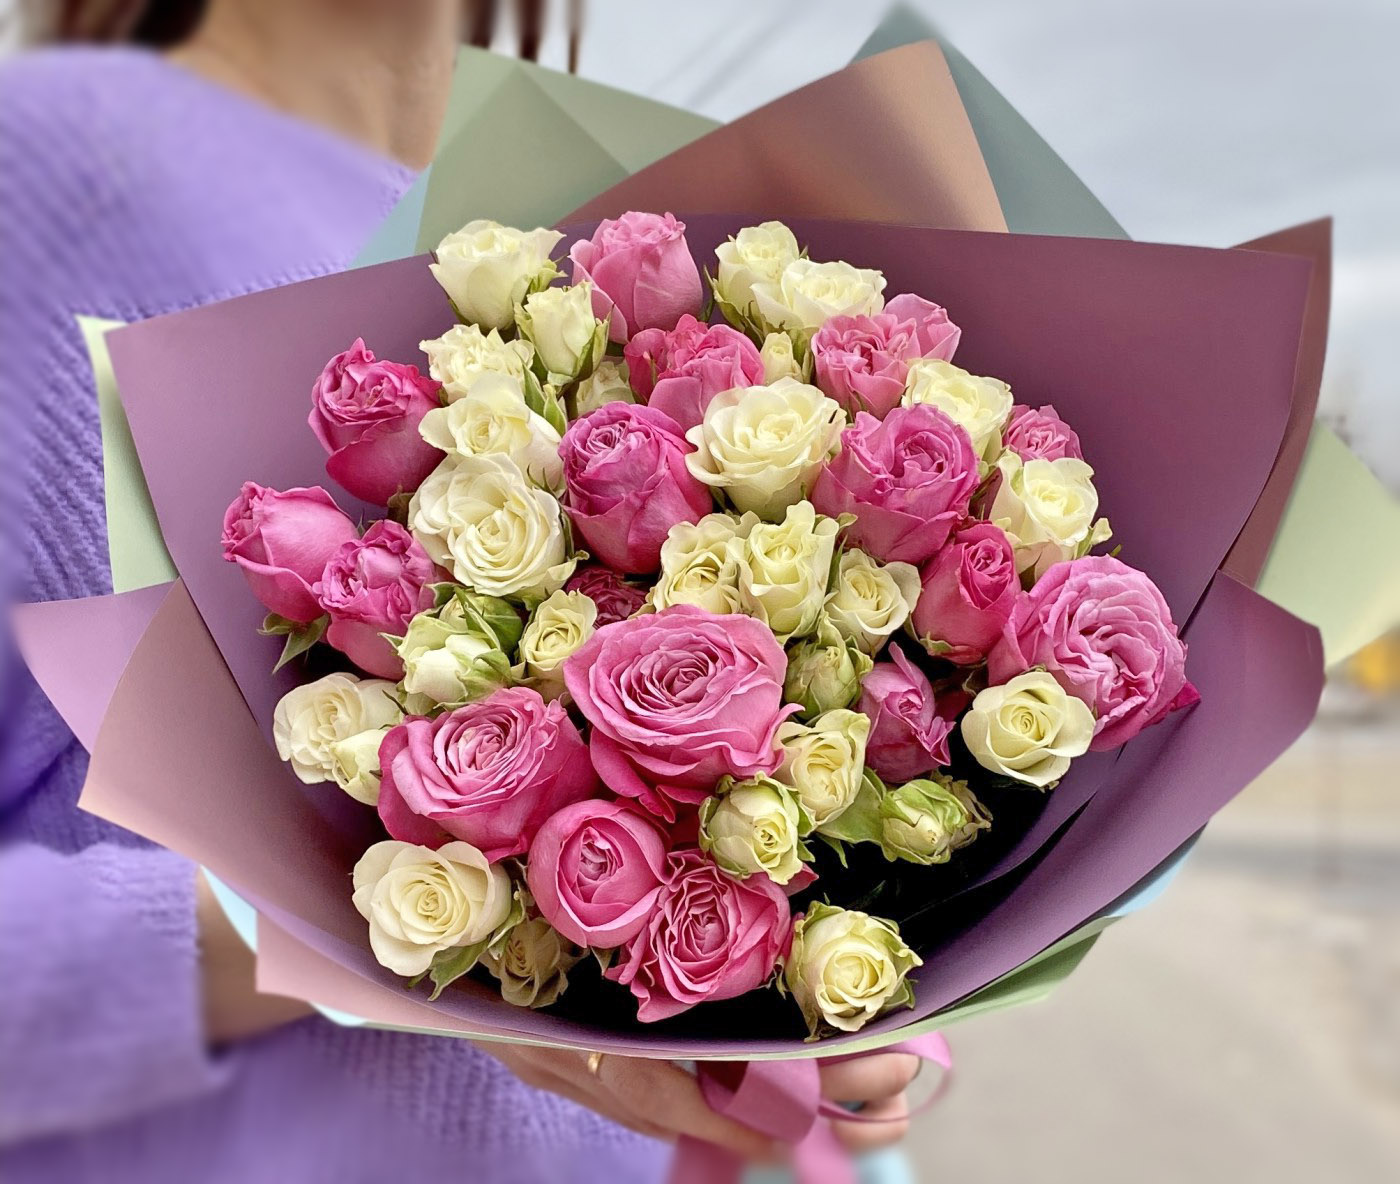 roses Do you want Blooms? A Smart Guide to Receiving “Just Because” Flowers from Your Partner